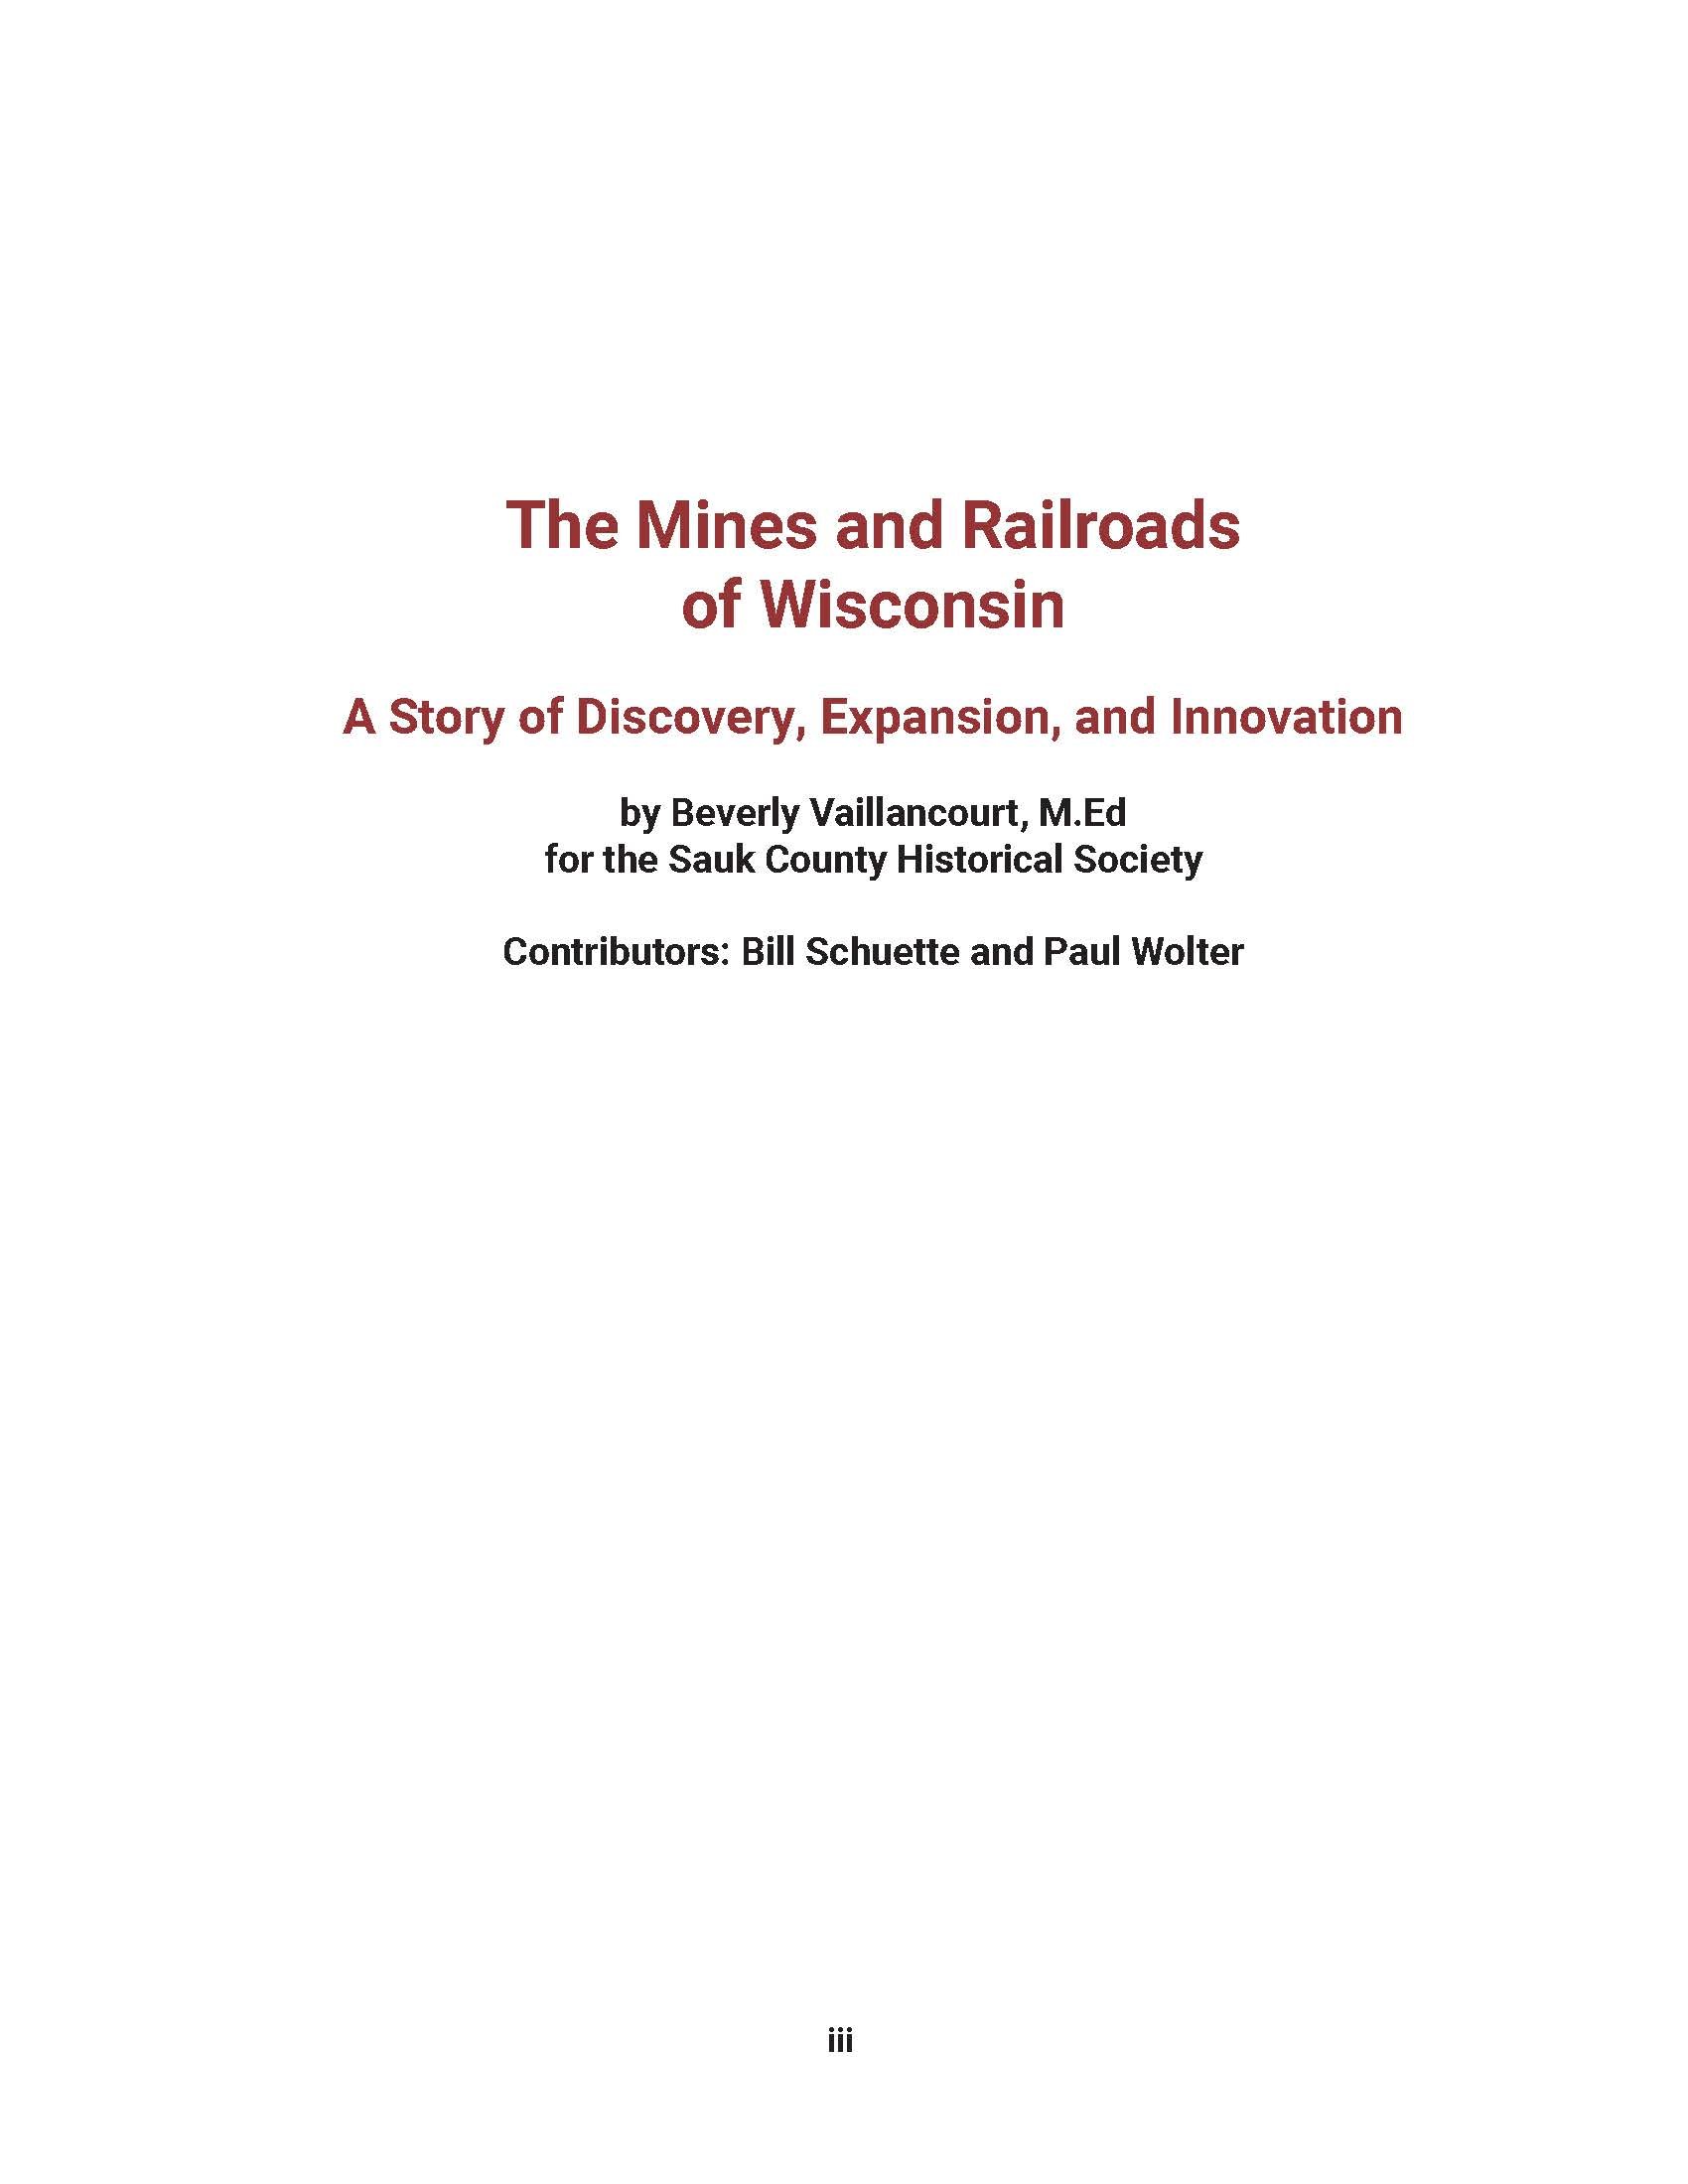 Mines and Railroads_final_Page_03.jpg